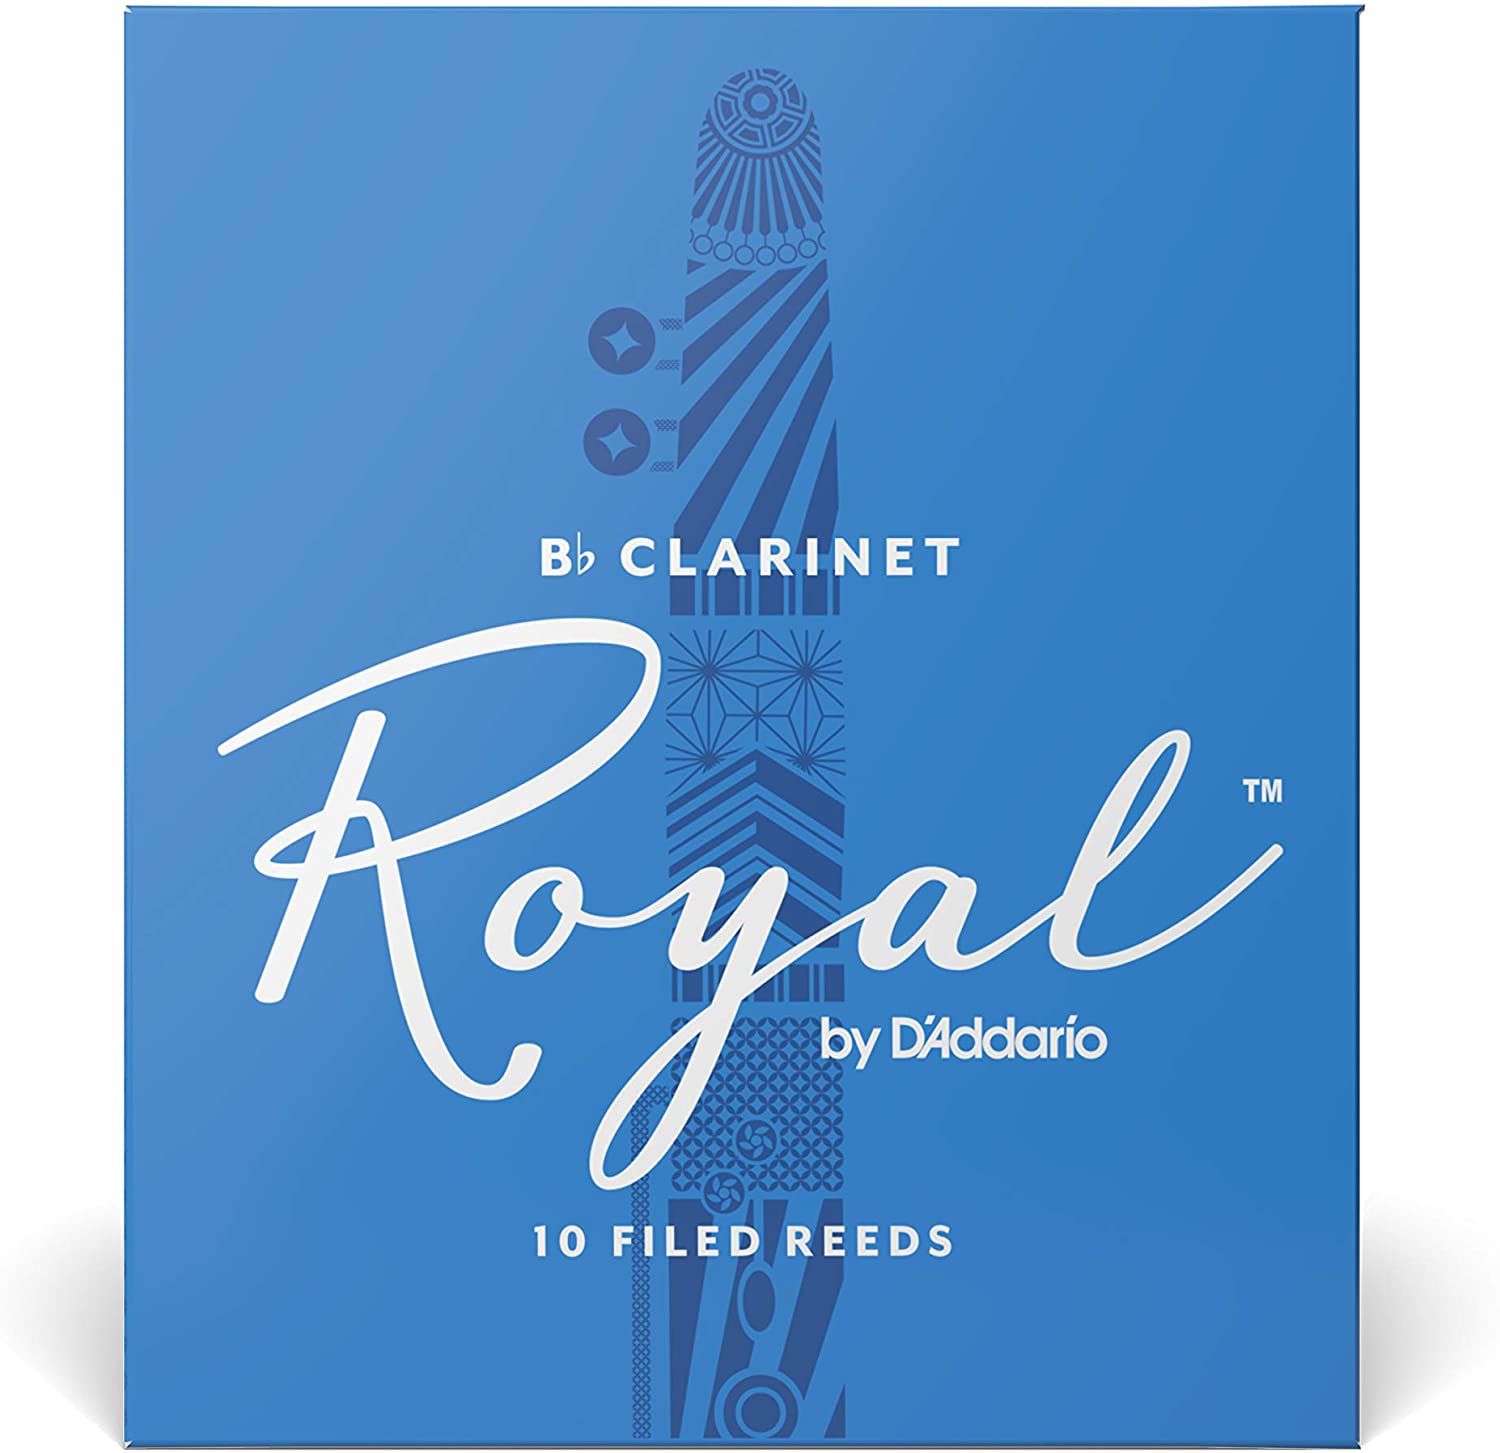 Royal by D'addario Bb Clarinet Reeds, 10pcs box (assorted strength)